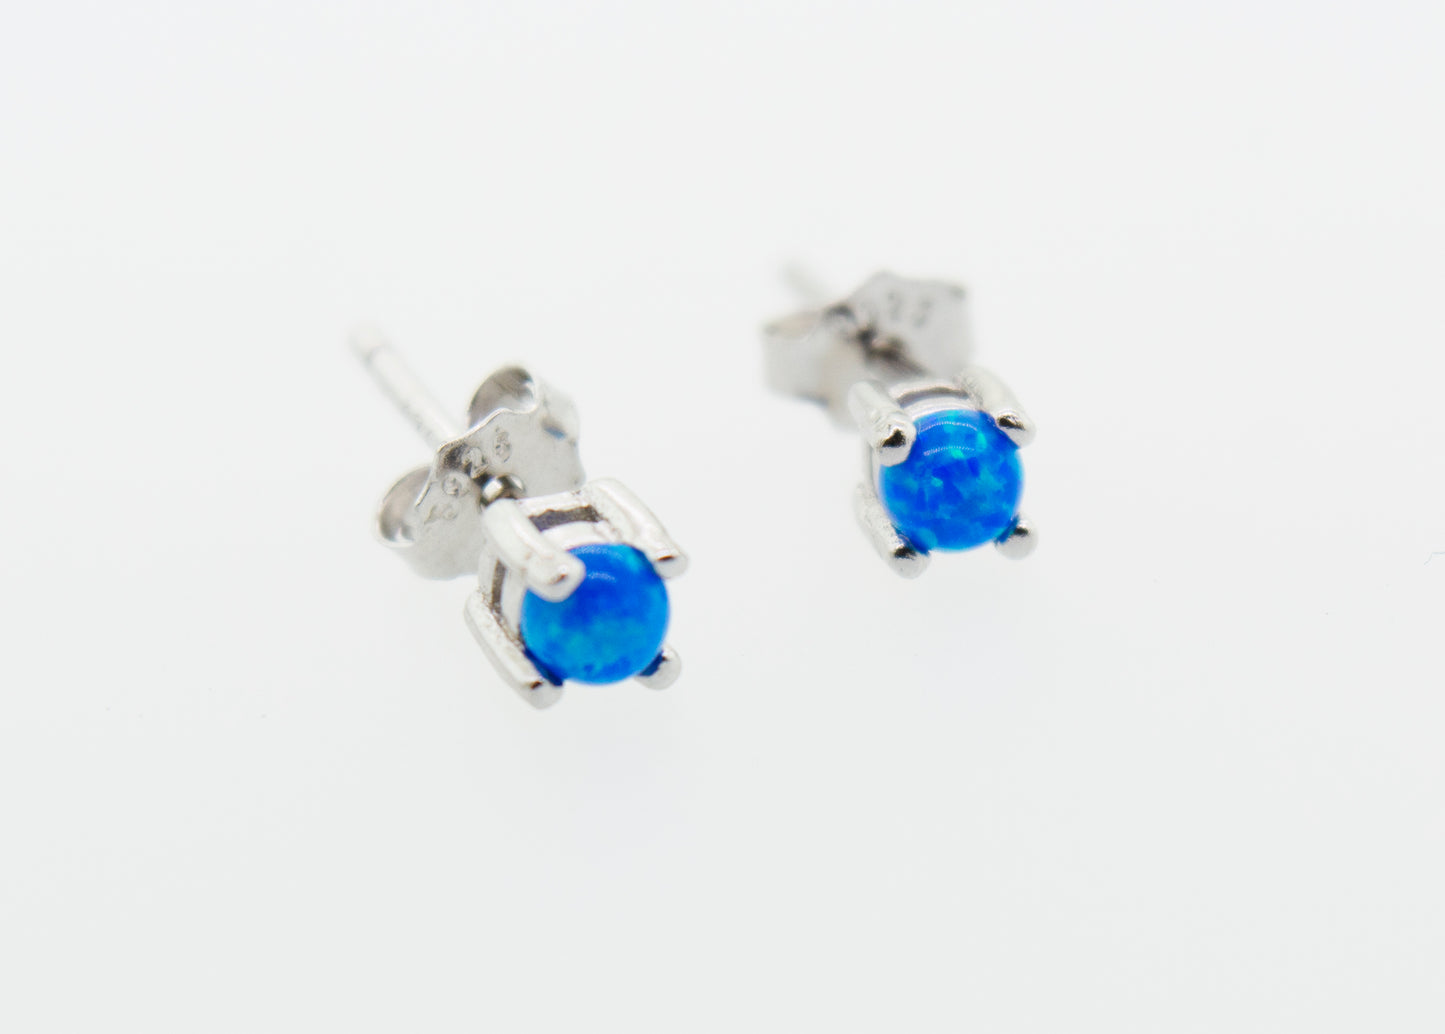 A pair of Super Silver Cultured Opal stud earrings on a white background.